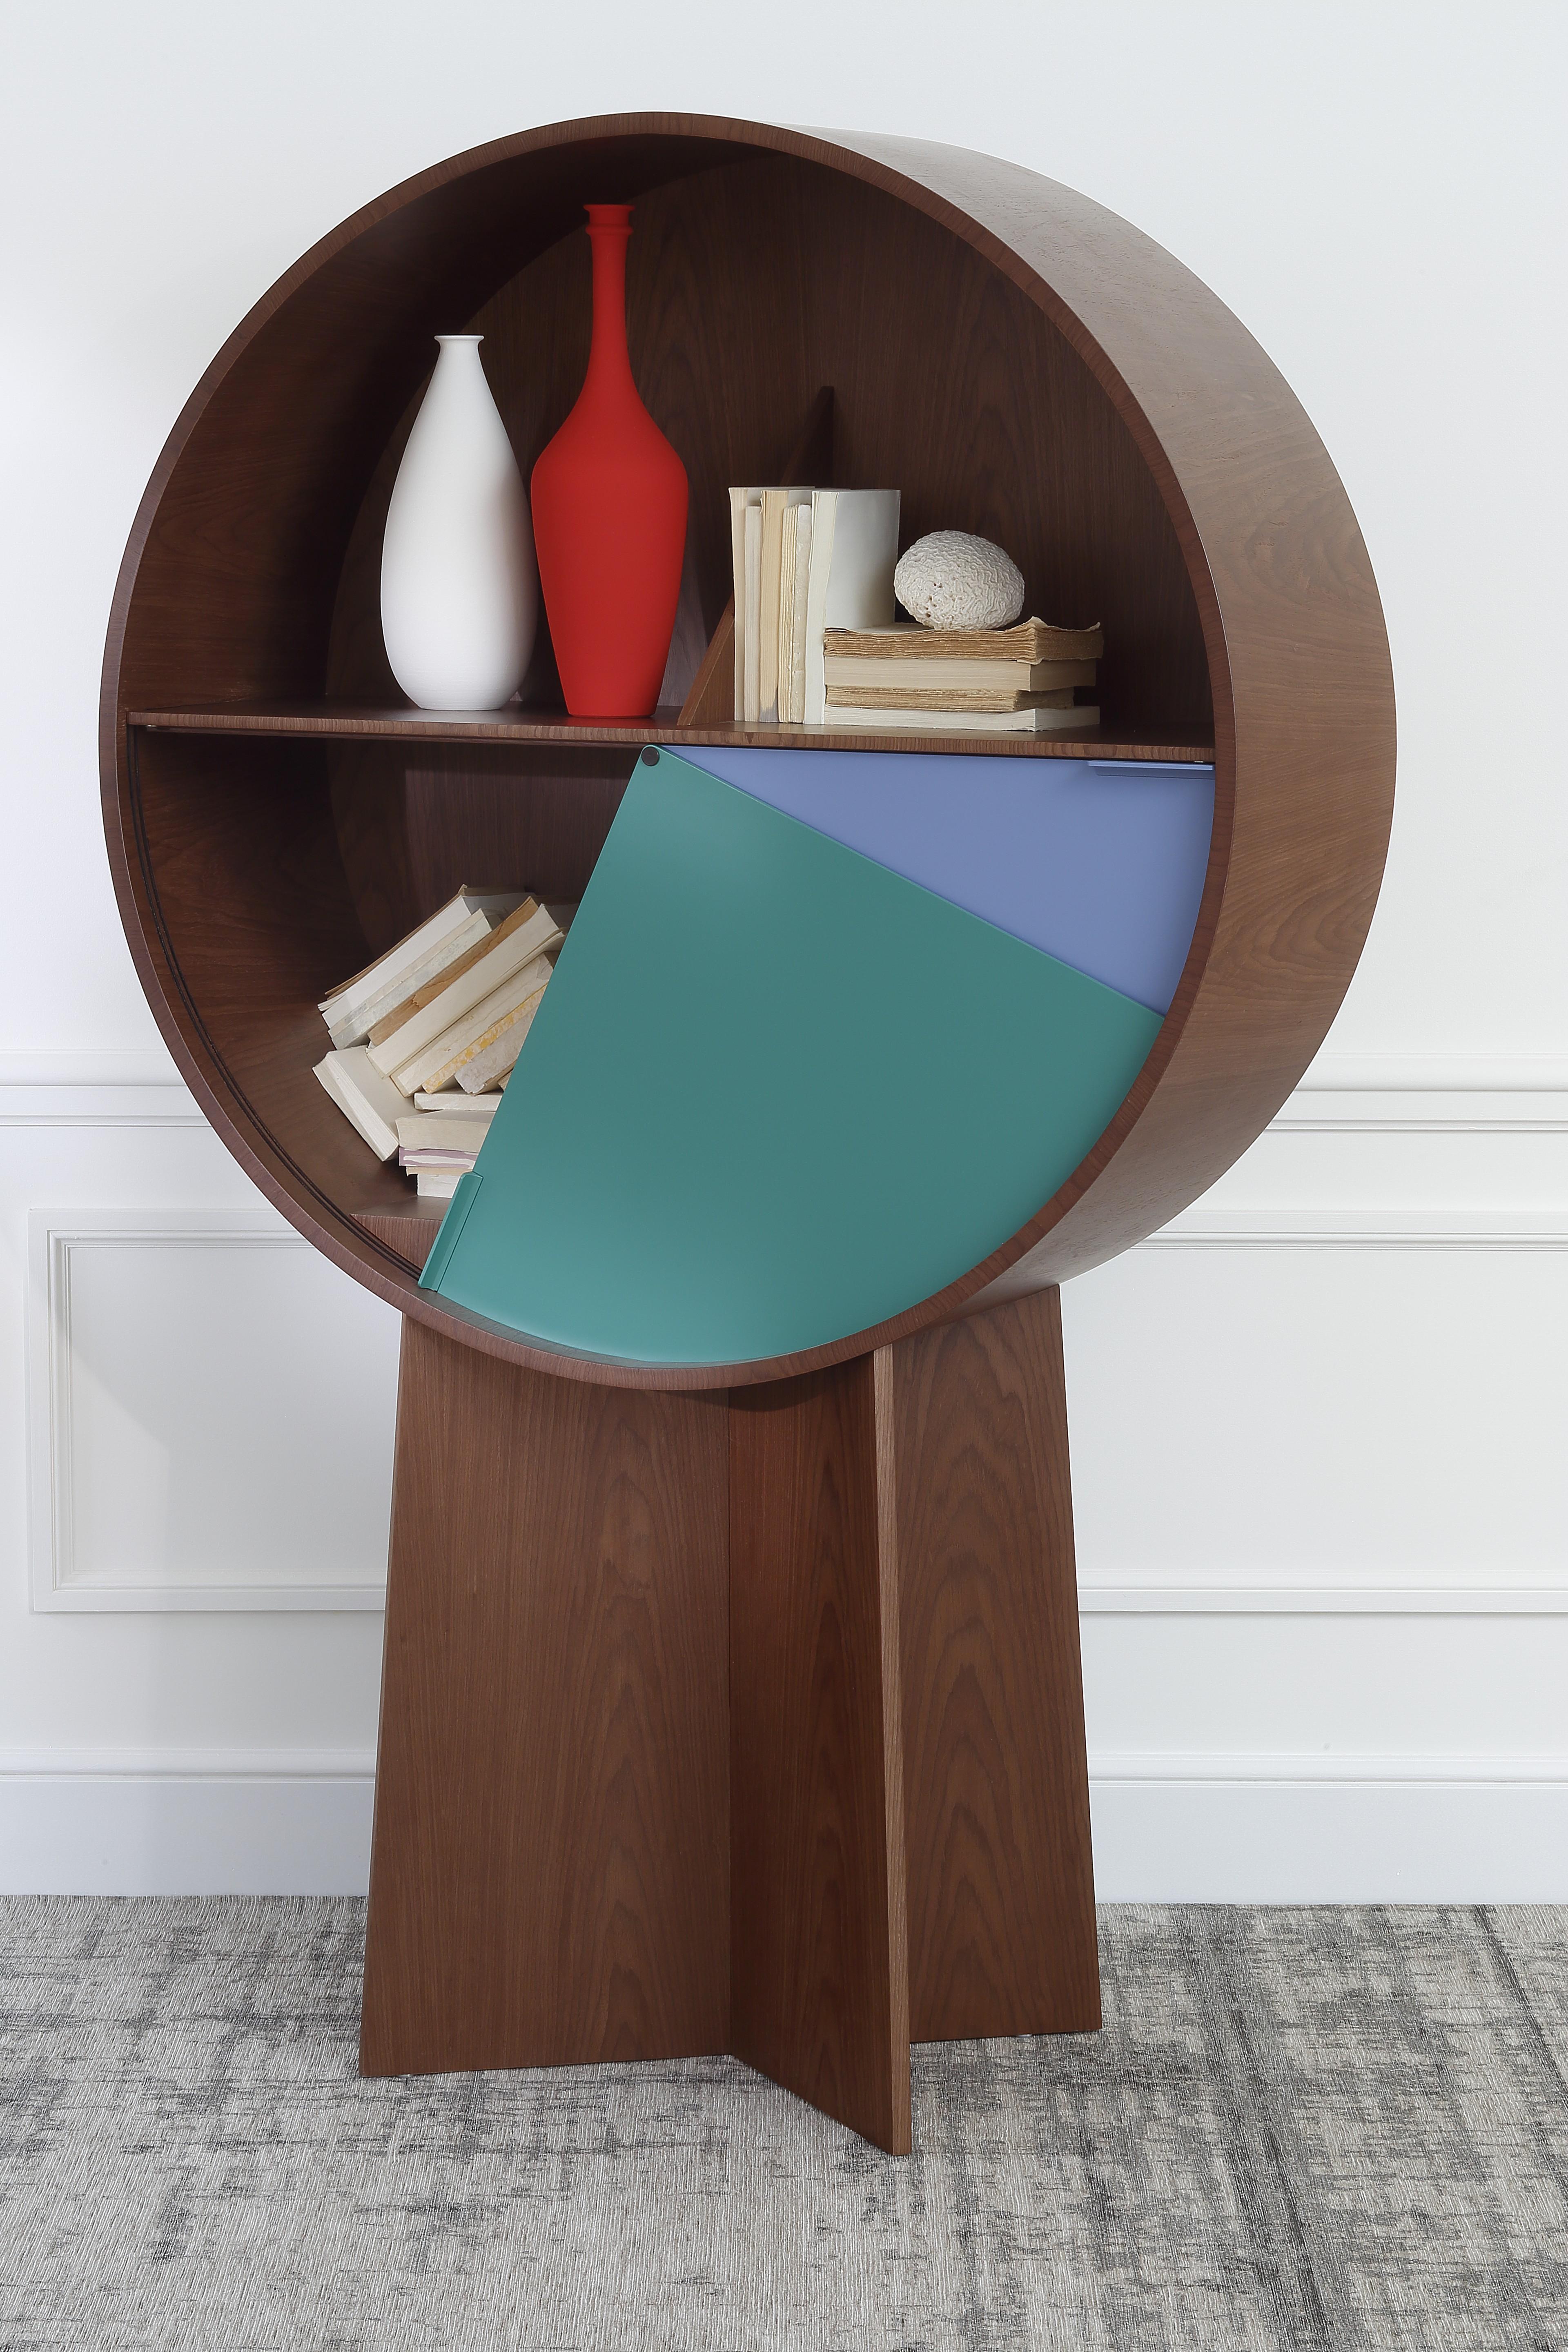 Walnut Luna storage cabinet by Patricia Urquiola
Materials: Walnut veneer on medium, or orange lacquer on medium. 2 sliding doors in two-tone lacquered hemispheres or in varnished walnut veneer
Technique: Lacquered or natural wood. 
Dimensions: D 40